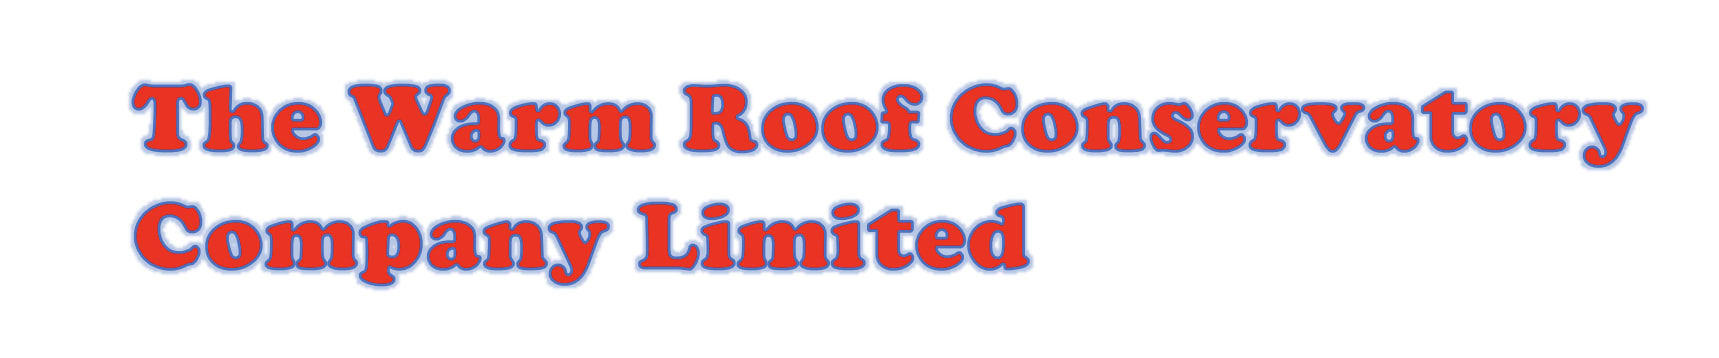 The Warm Roof Conservatory Company